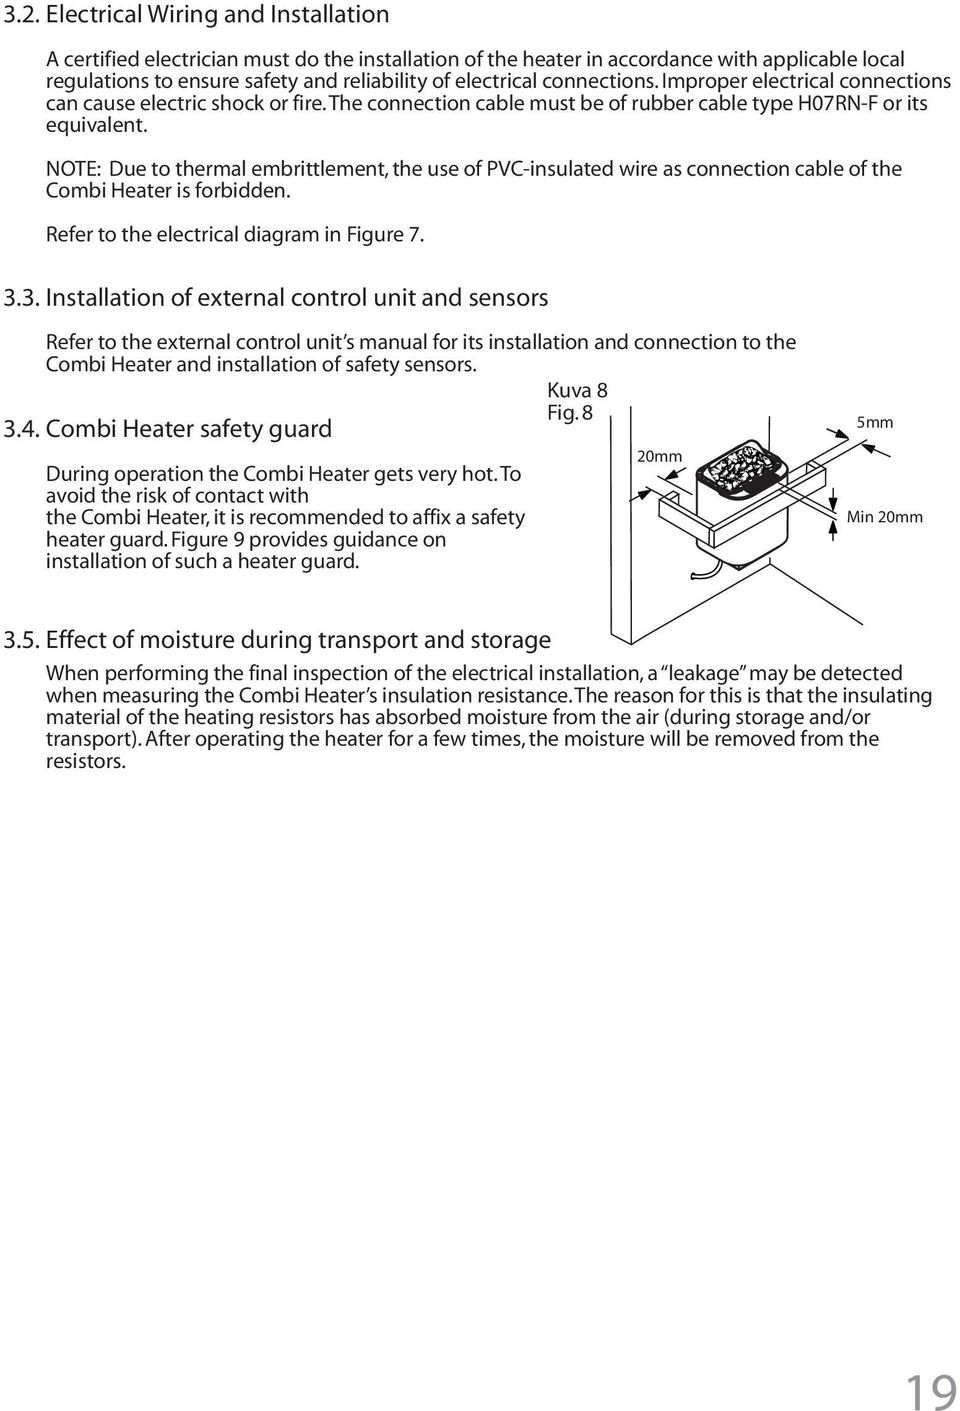 NOTE: Due to thermal embrittlement, the use of PVC-insulated wire as connection cable of the Combi Heater is forbidden. Refer to the electrical diagram in Figure 7. 3.